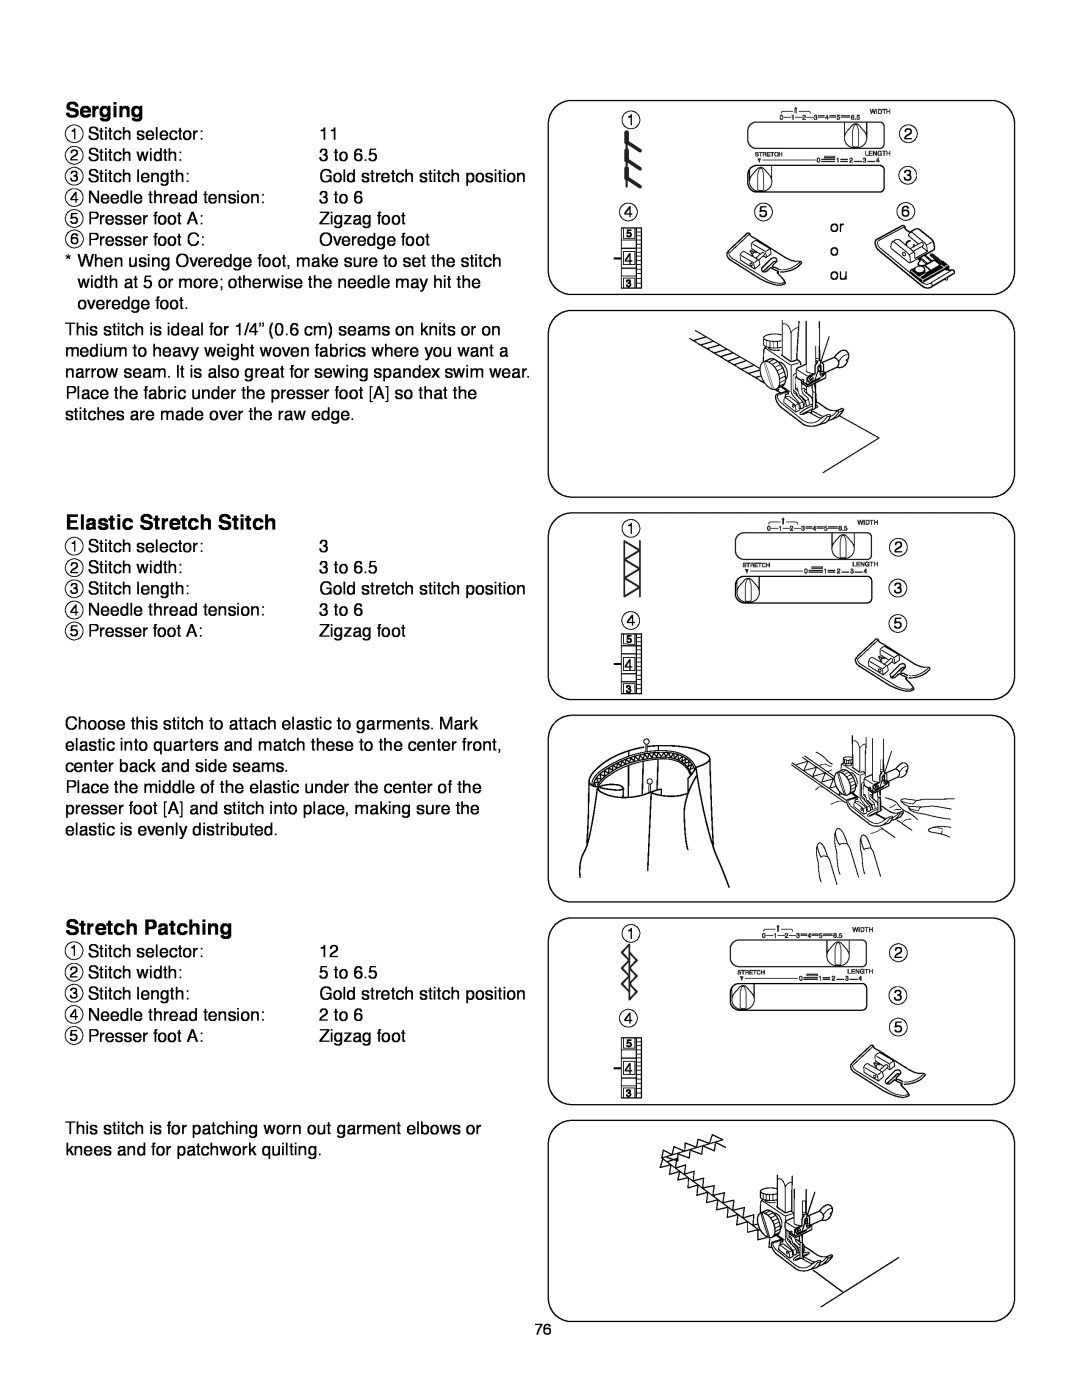 Janome MS-5027 instruction manual Serging, Elastic Stretch Stitch, Stretch Patching 